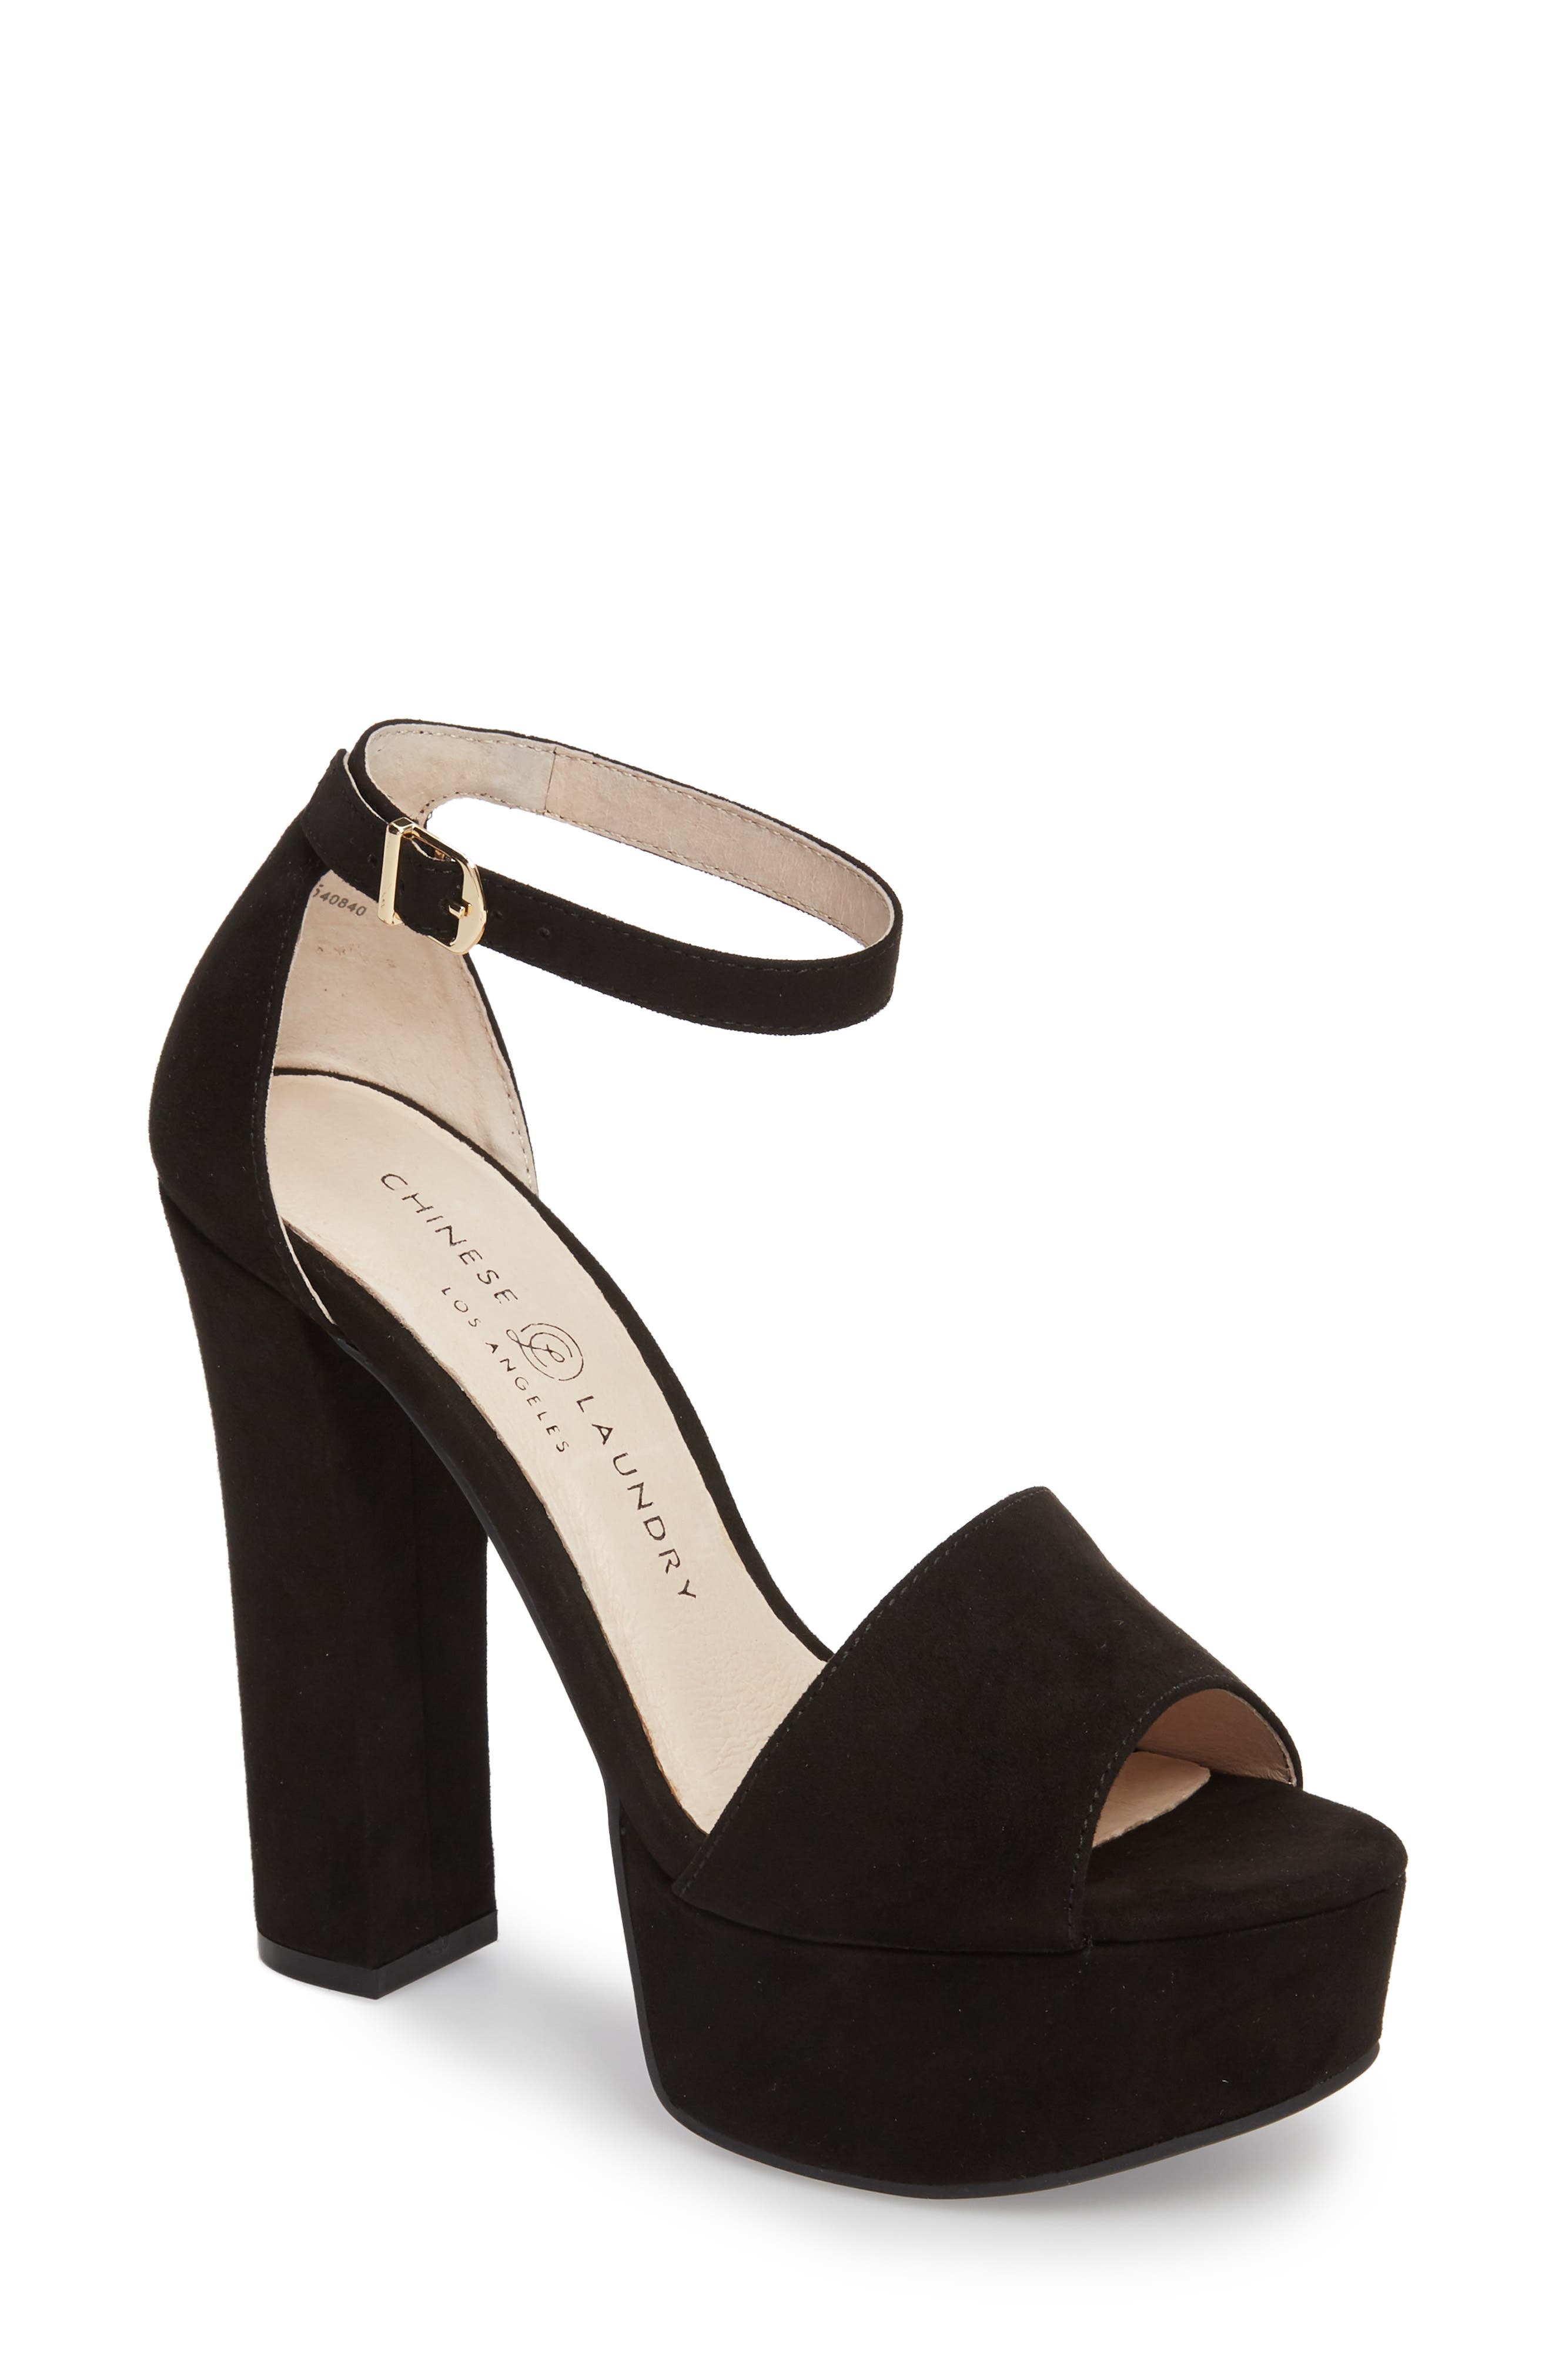 cl by laundry go on platform heel